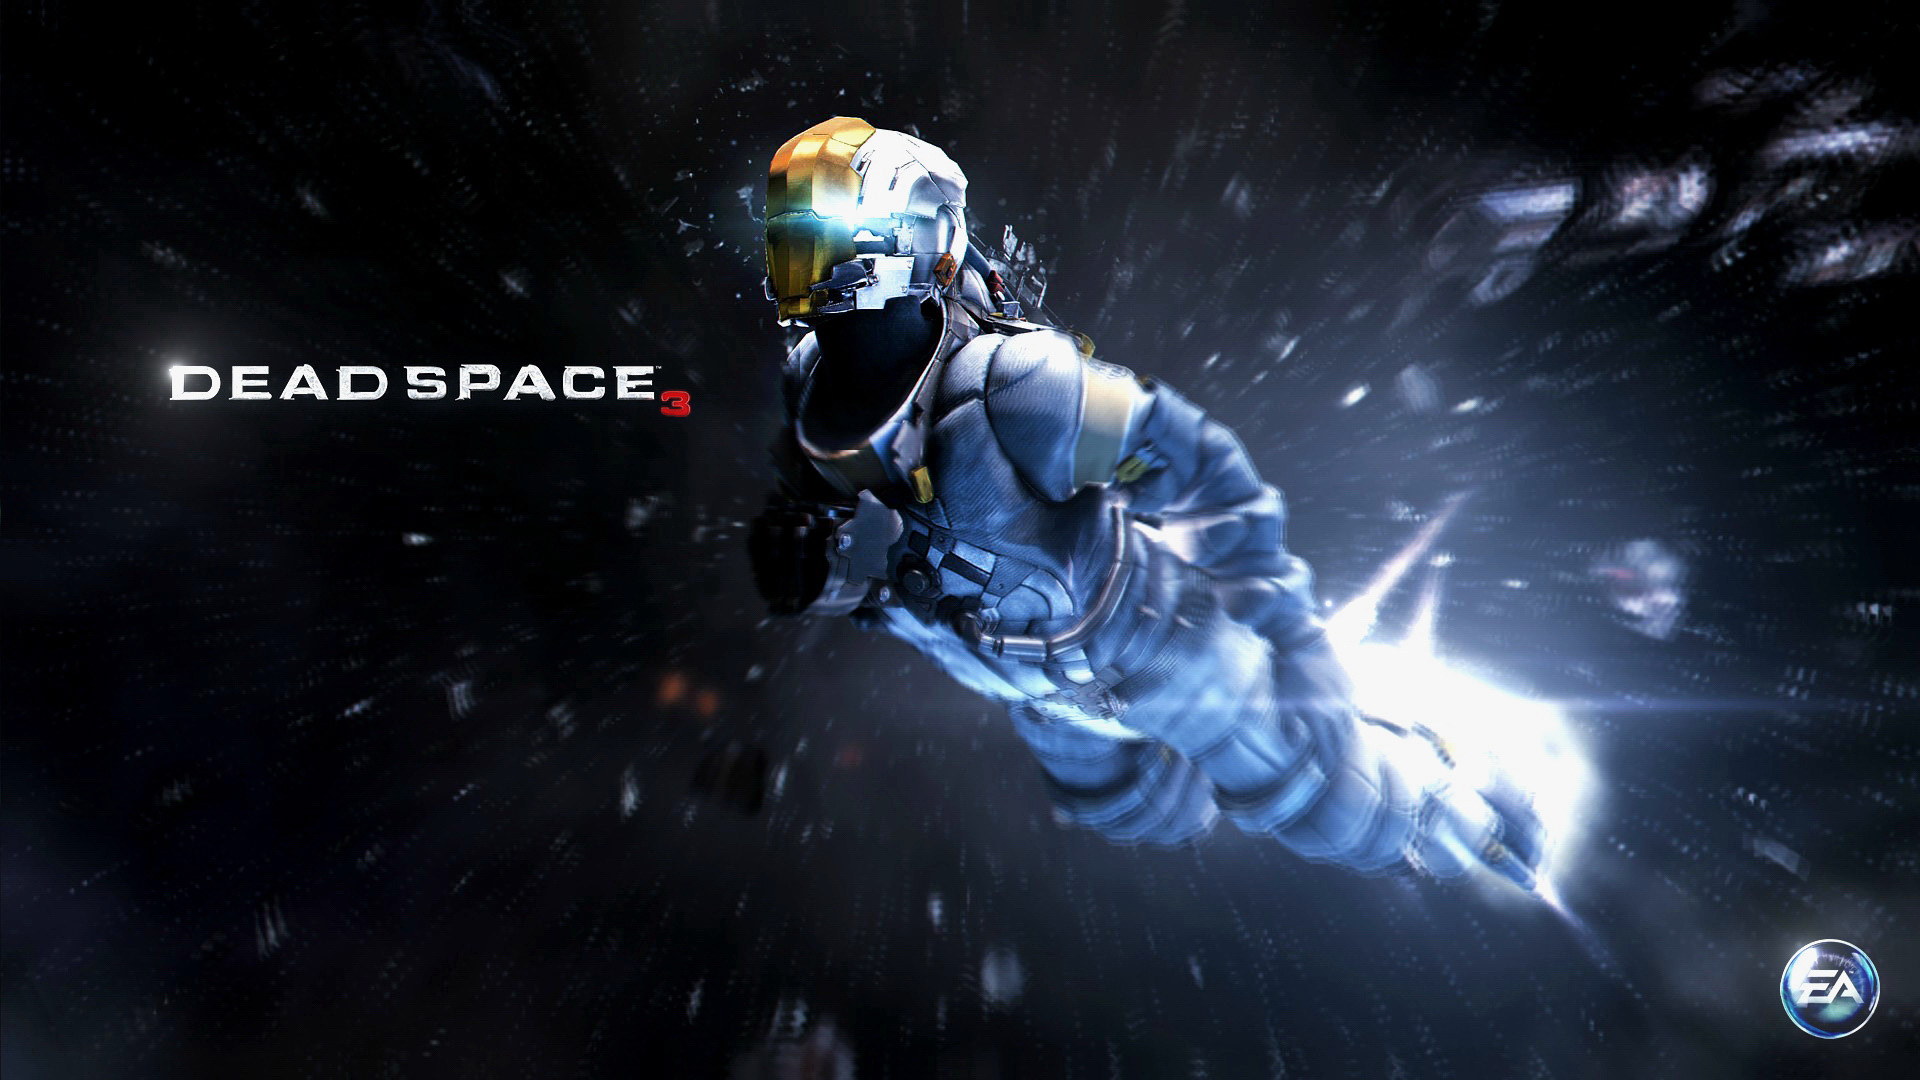 video game, dead space 3, isaac clarke, dead space Full HD